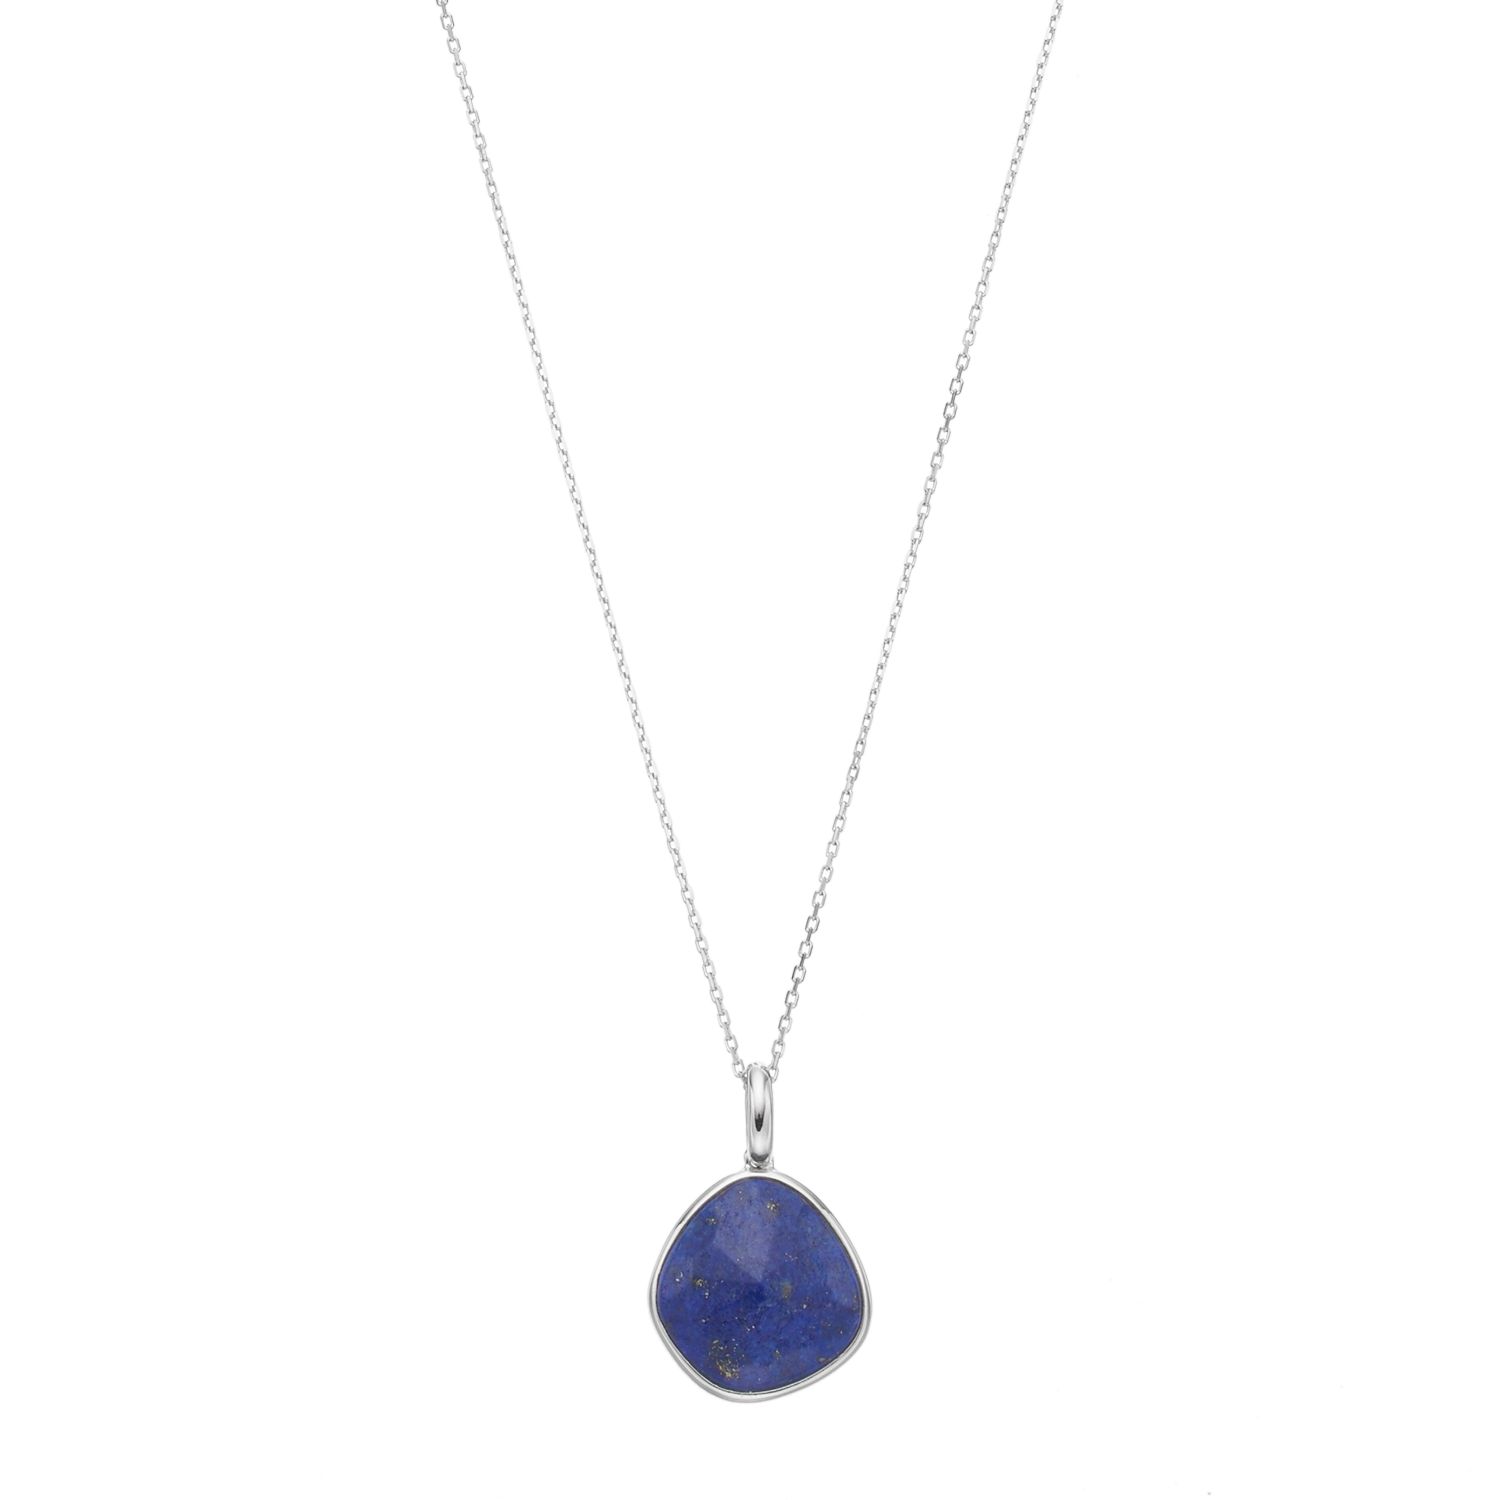 Lapis Lazuli pendant in 925 Sterling Silver natural rich blue with light Pyrite flecks handmade 34x63mm